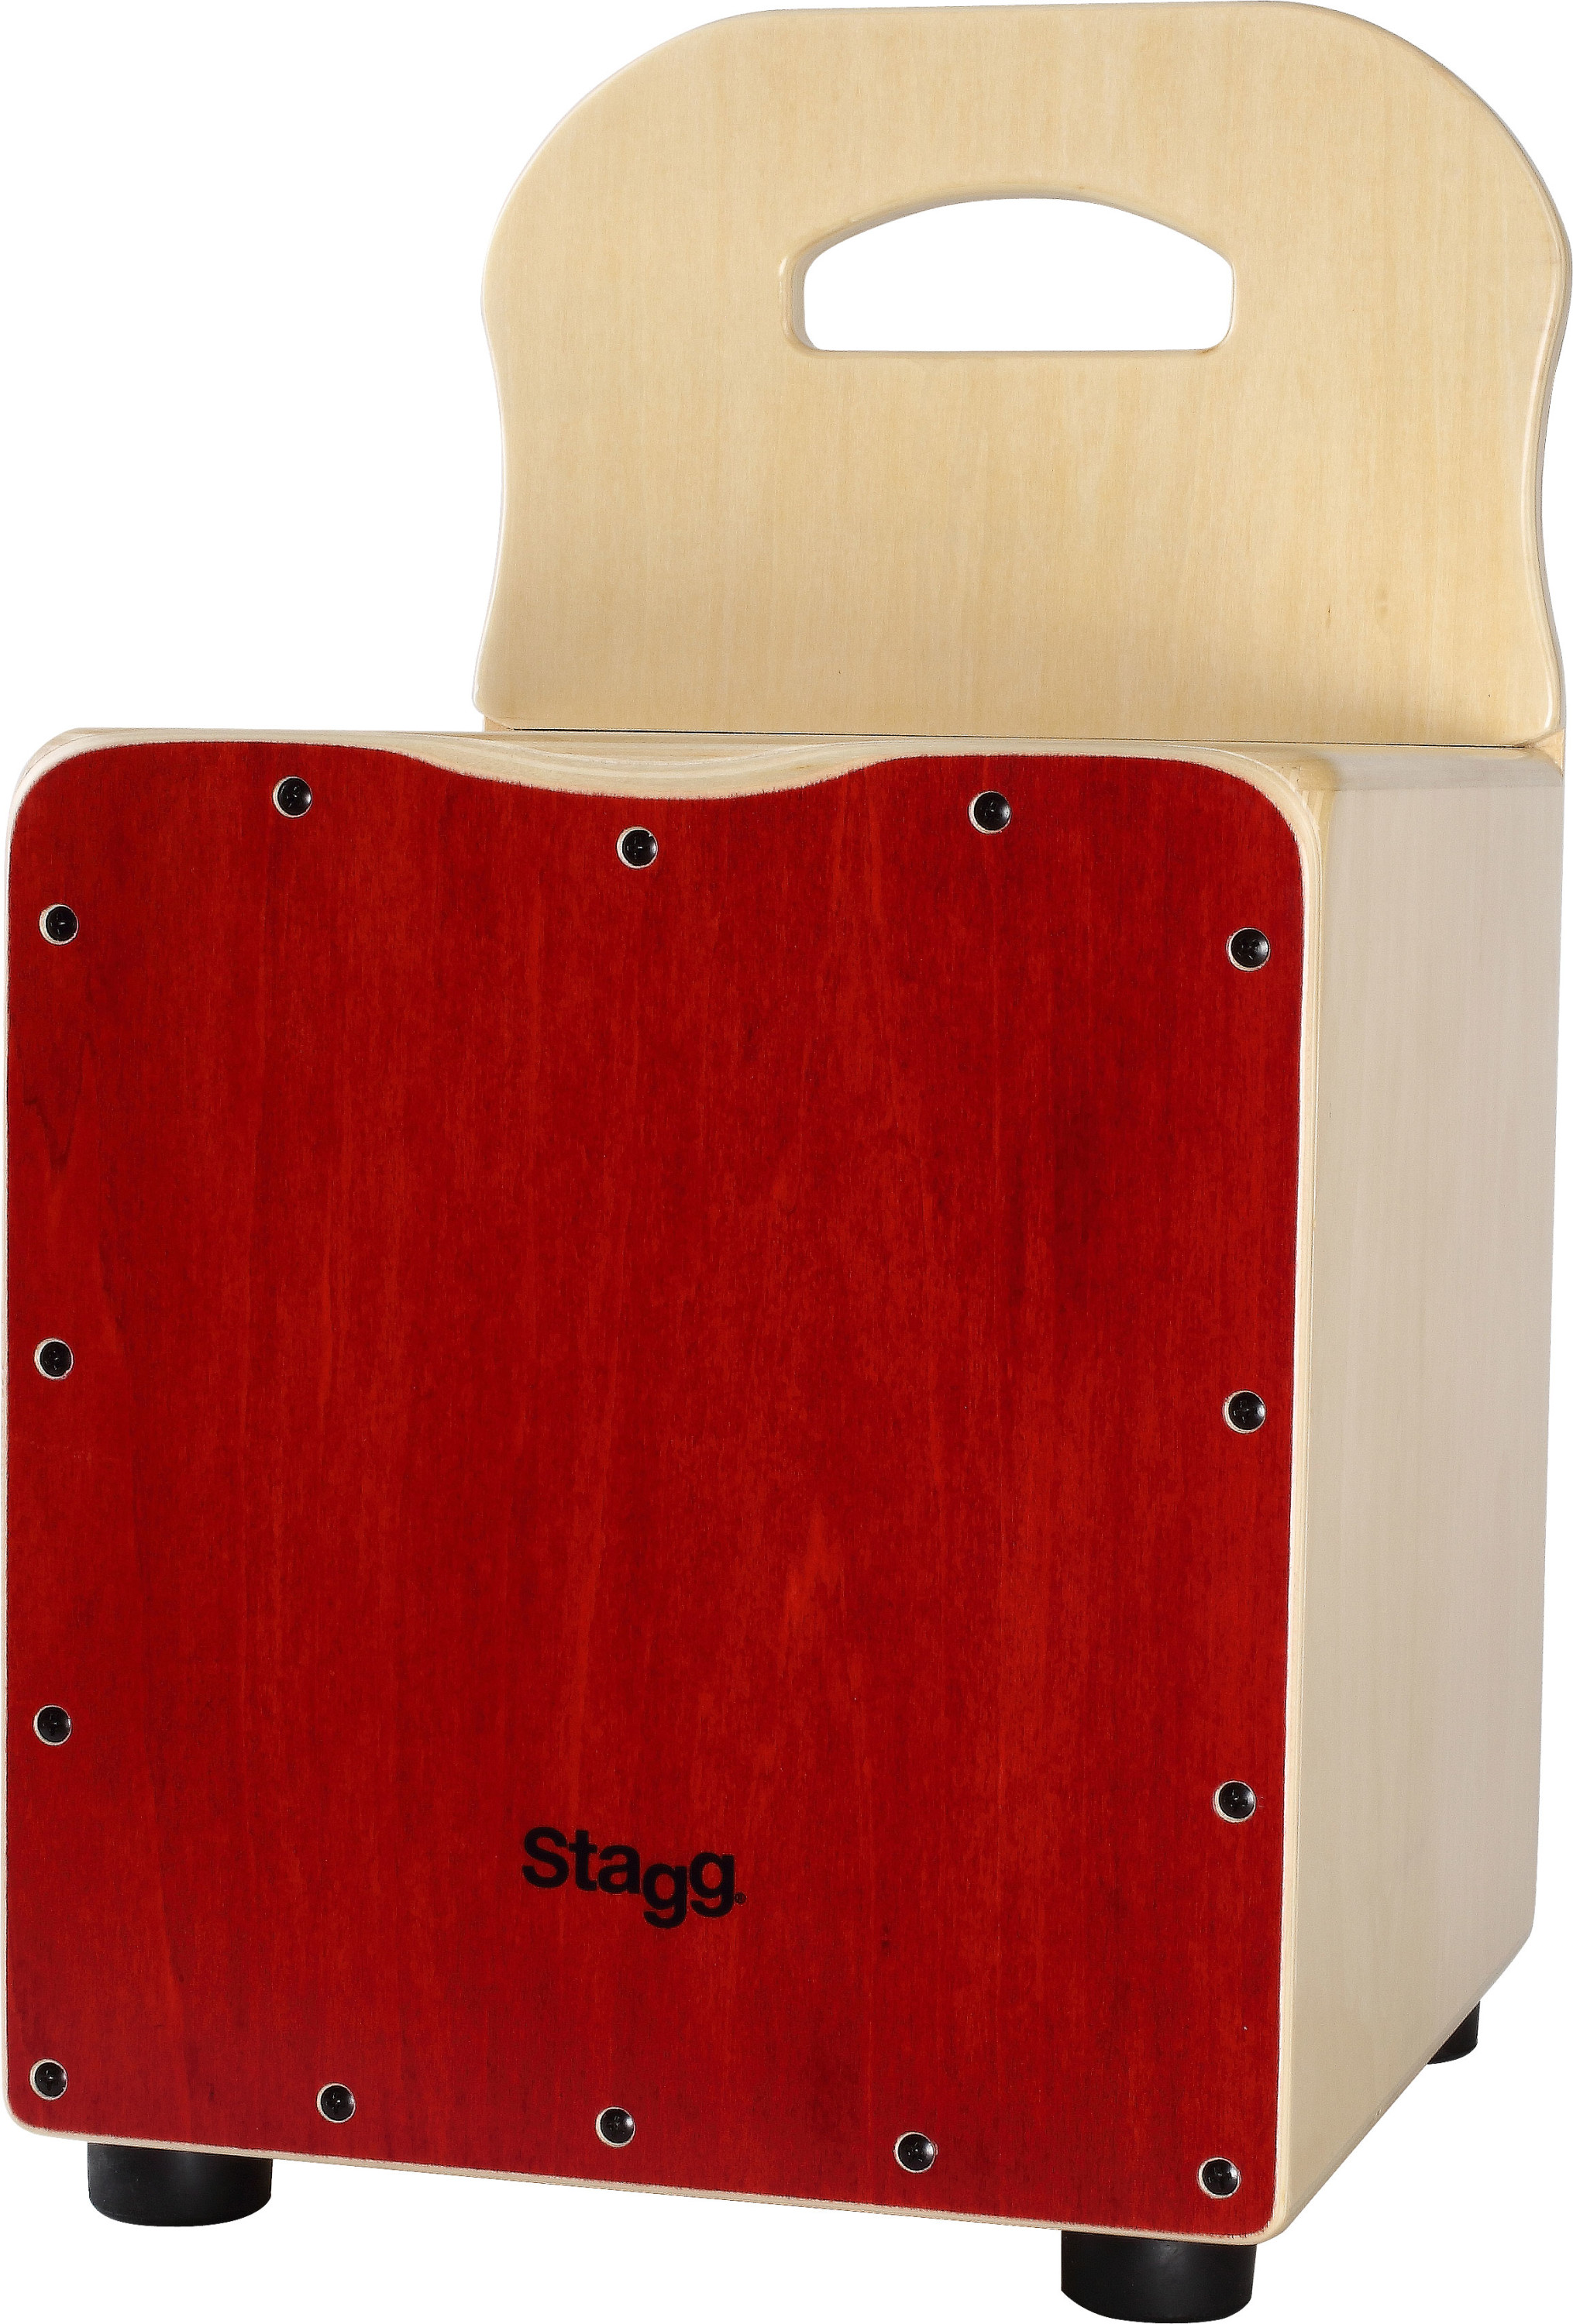 Stagg Easygo Cajon Enfant Rouge - Hit percussion - Variation 1